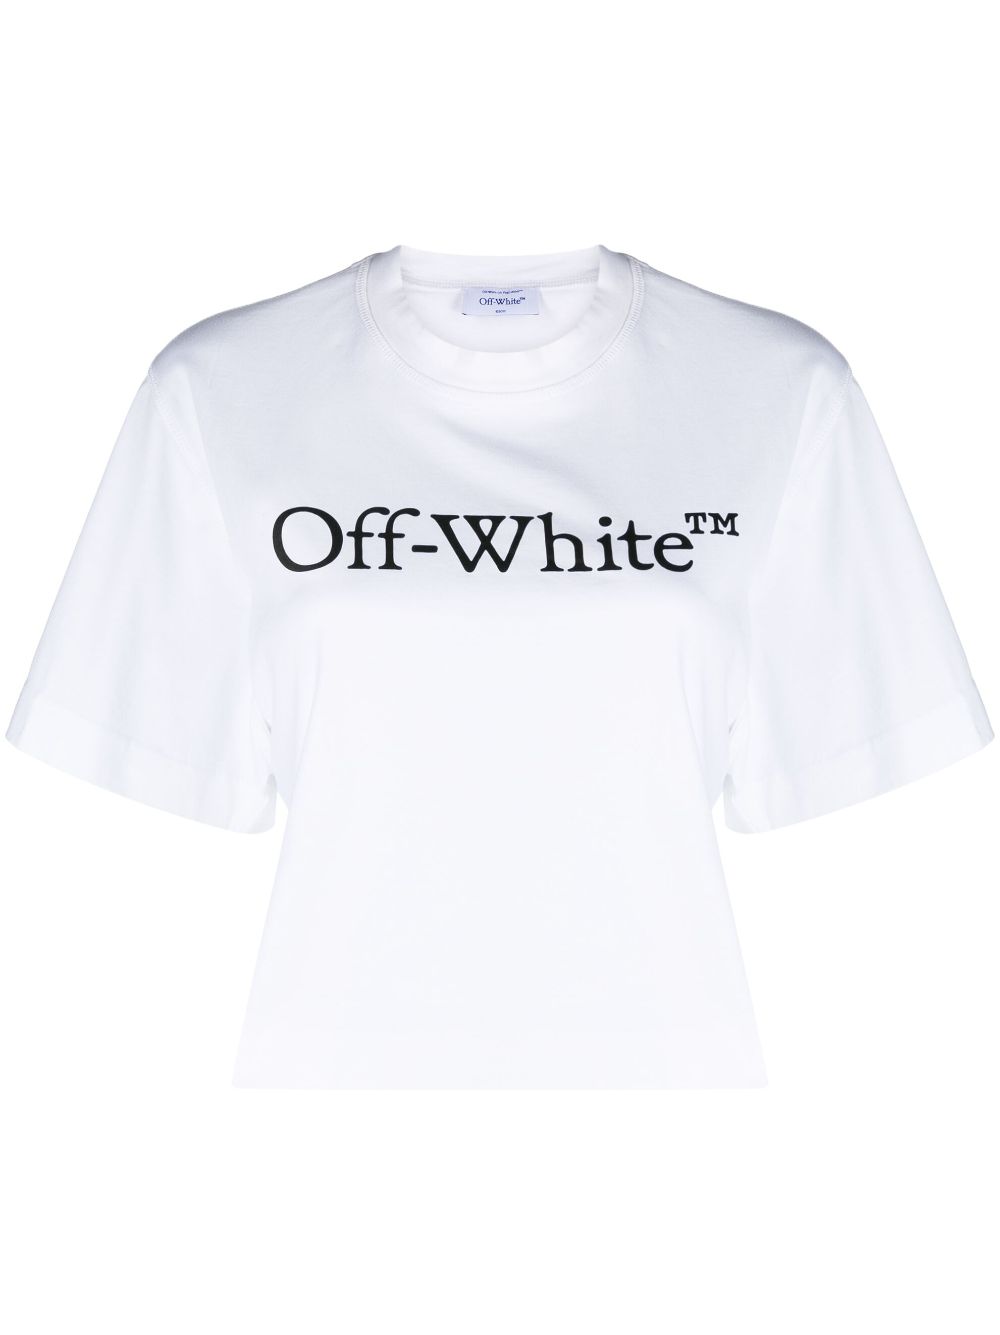 Off-white Big Logo Bookish 短款t恤 In White